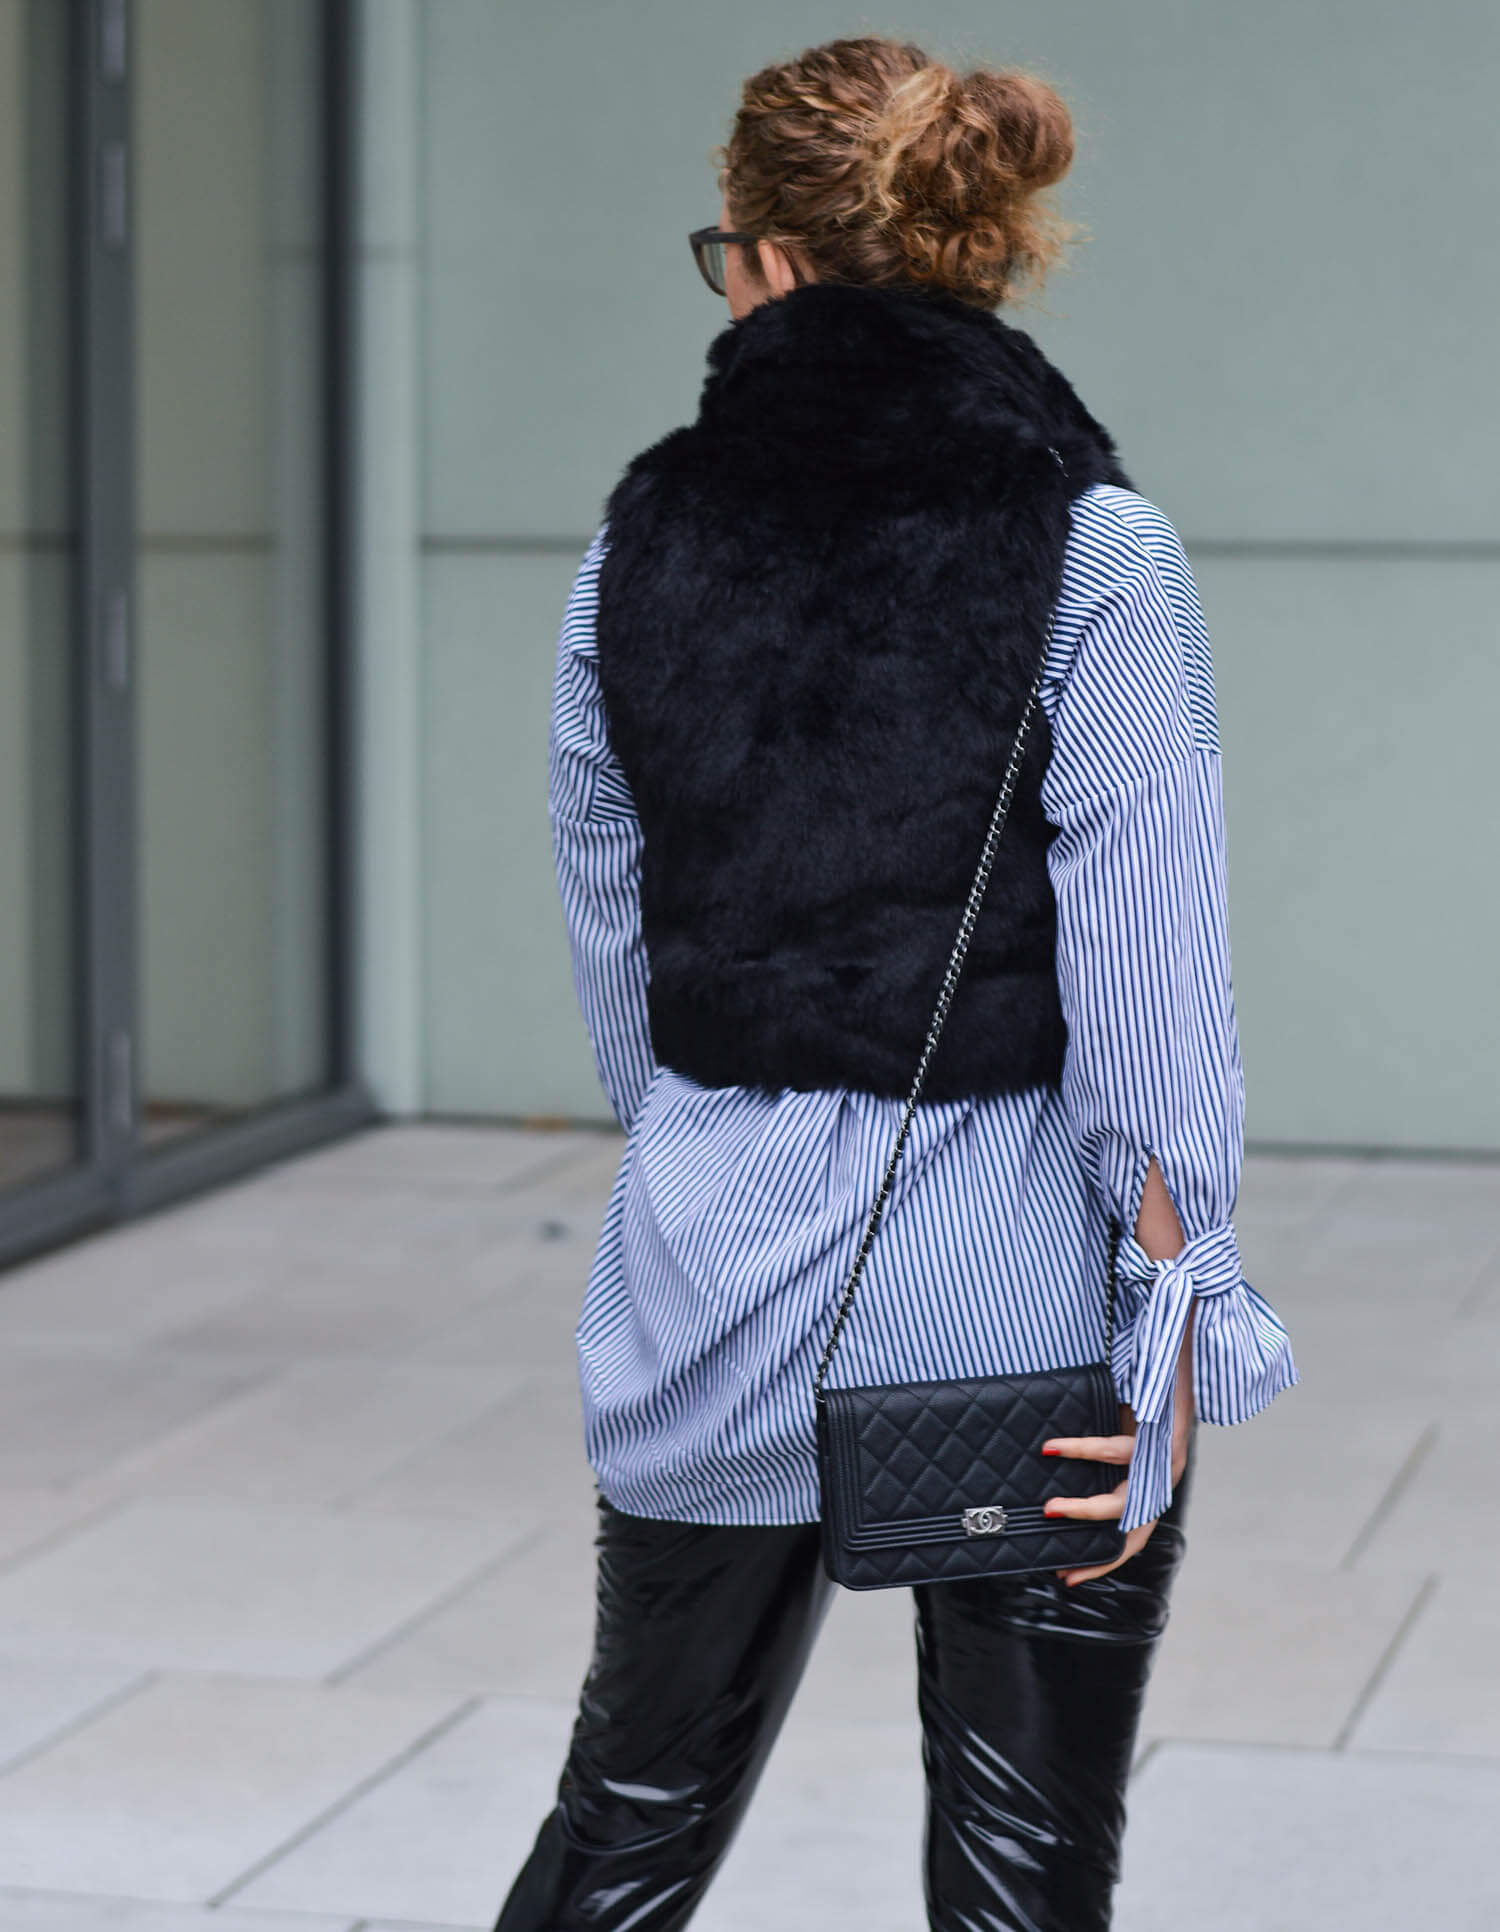 Kationette-fashionblogger-nrw-Outfit-Woolcoat-Striped-Blouse-Fake-Fur-Vest-and-Vinyl-Pants